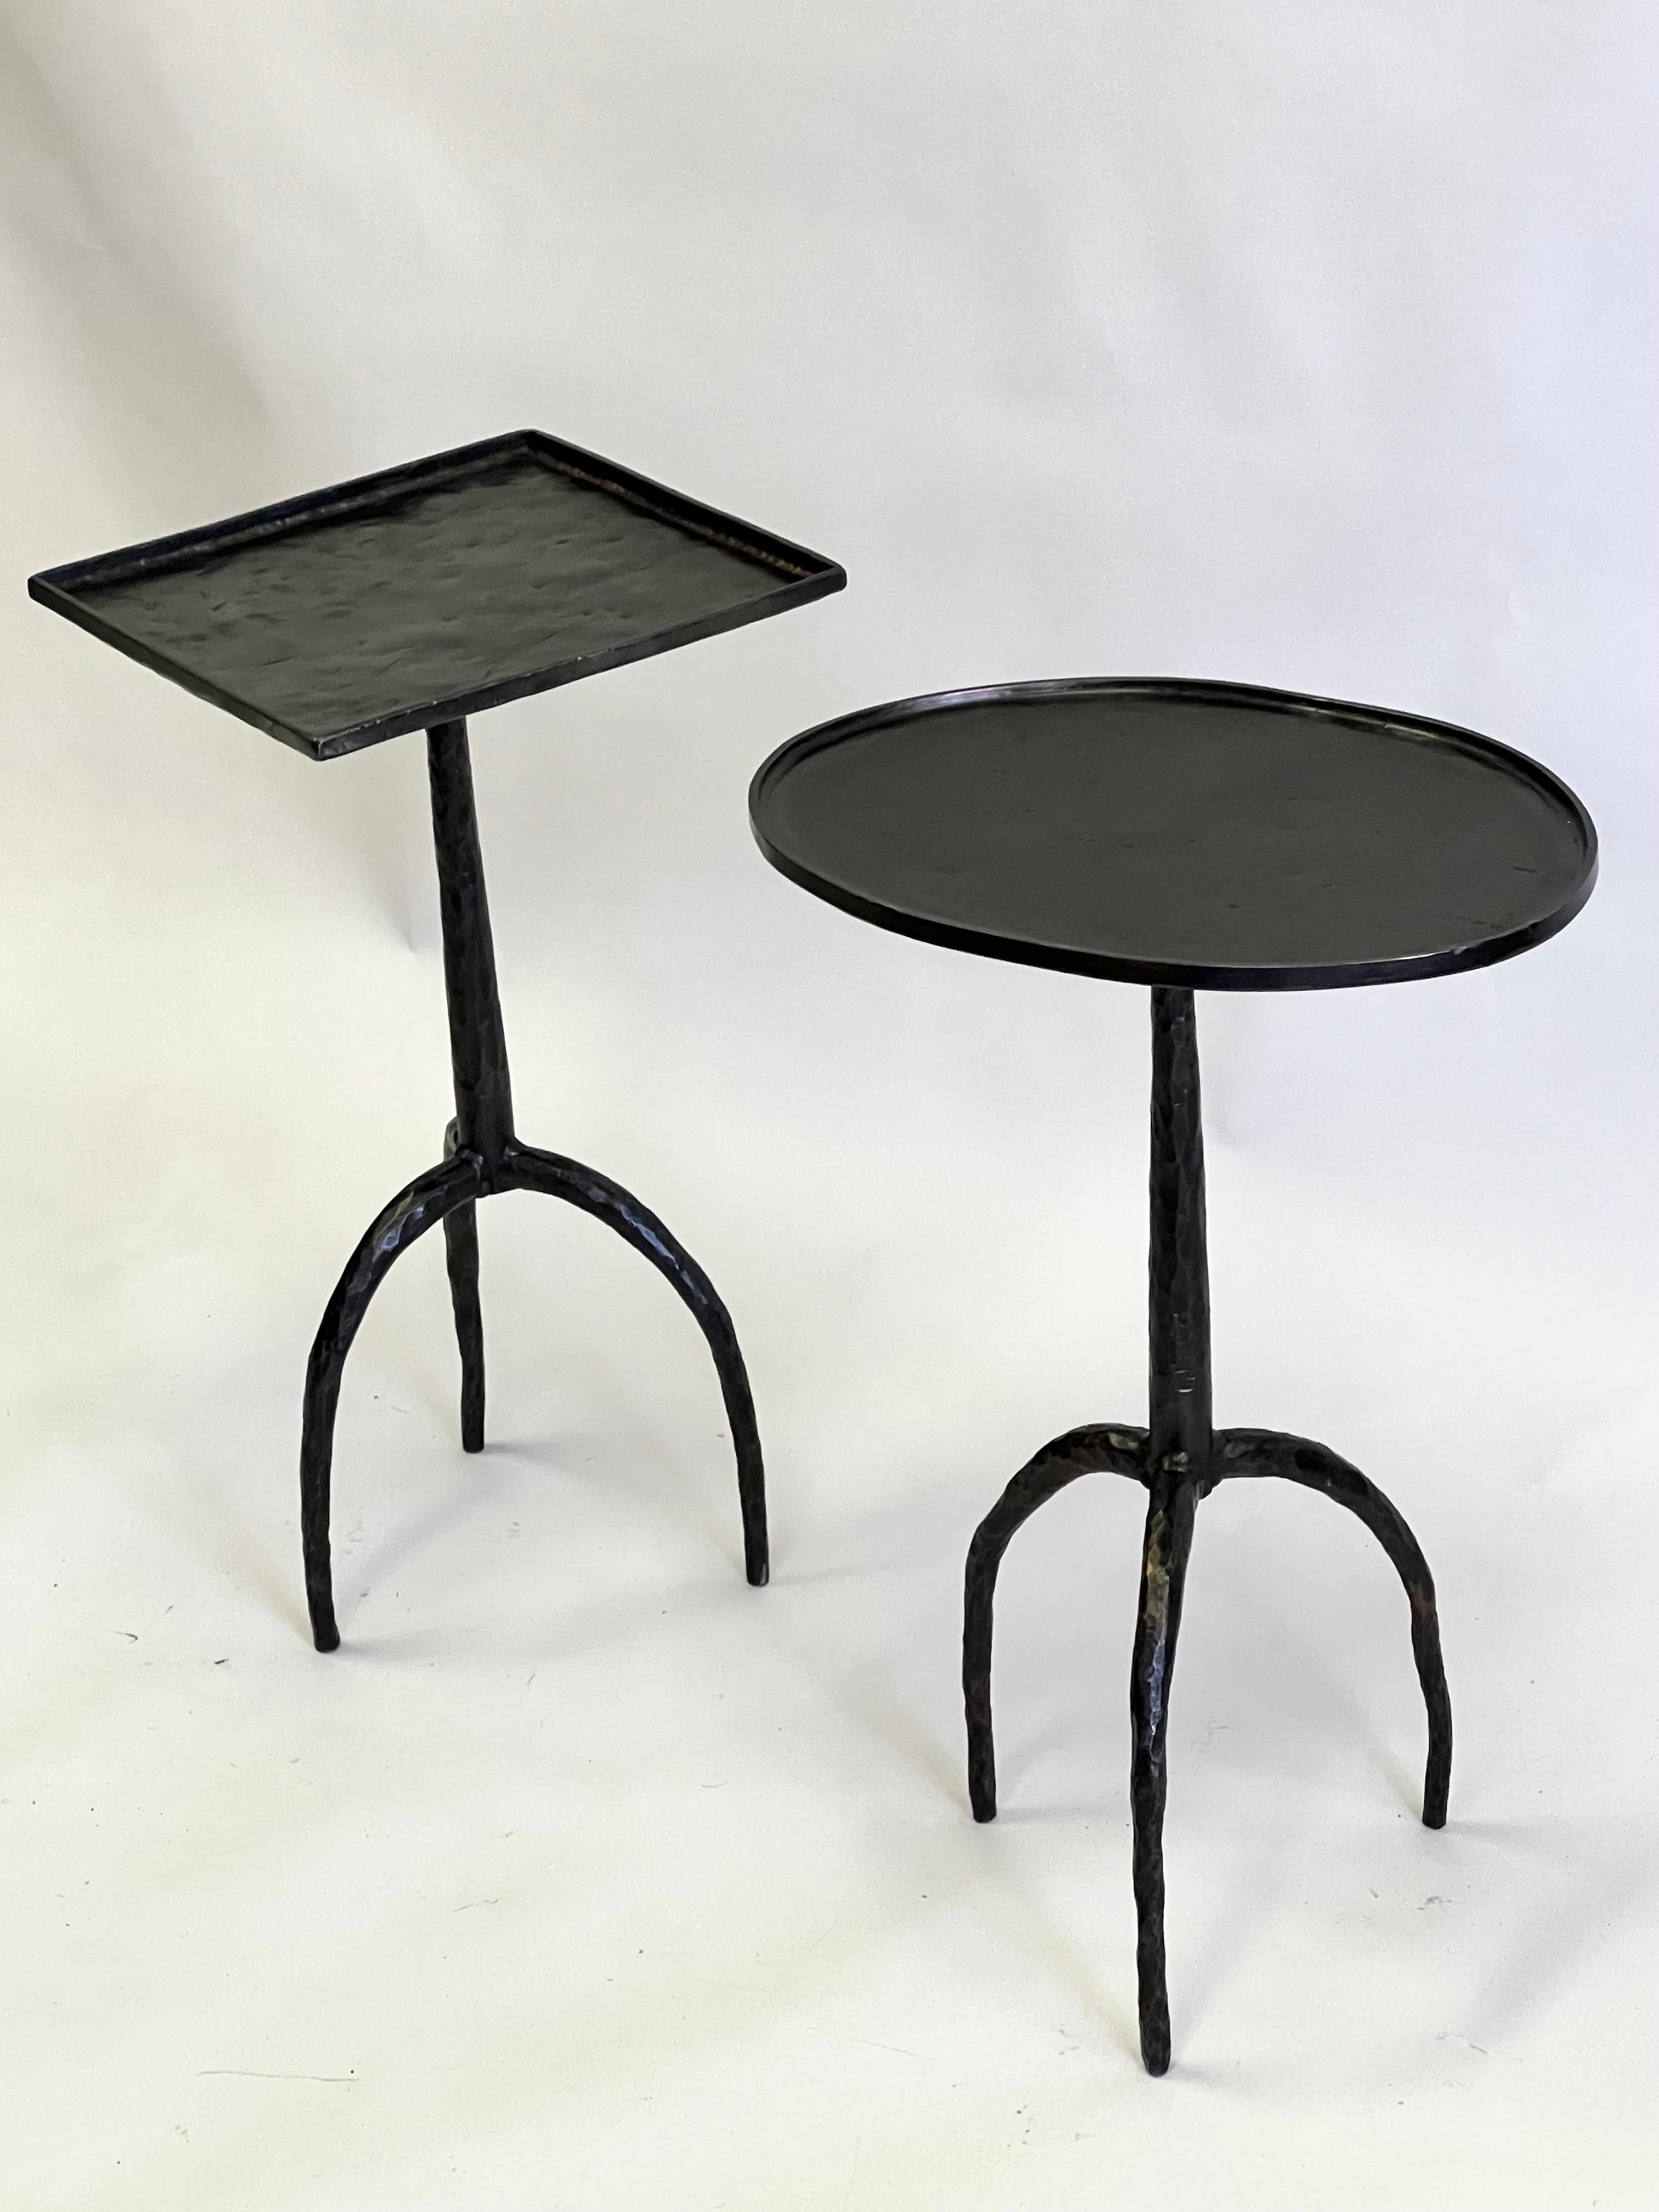 Exquisite and exotic pair of French Hand Hammered Wrought Iron Side Tables in the style of Alberto and Diego Giacometti. The pieces reflect both modern craftsman and brutalist sensibilities, yet maintain a delicate composure and strong unique